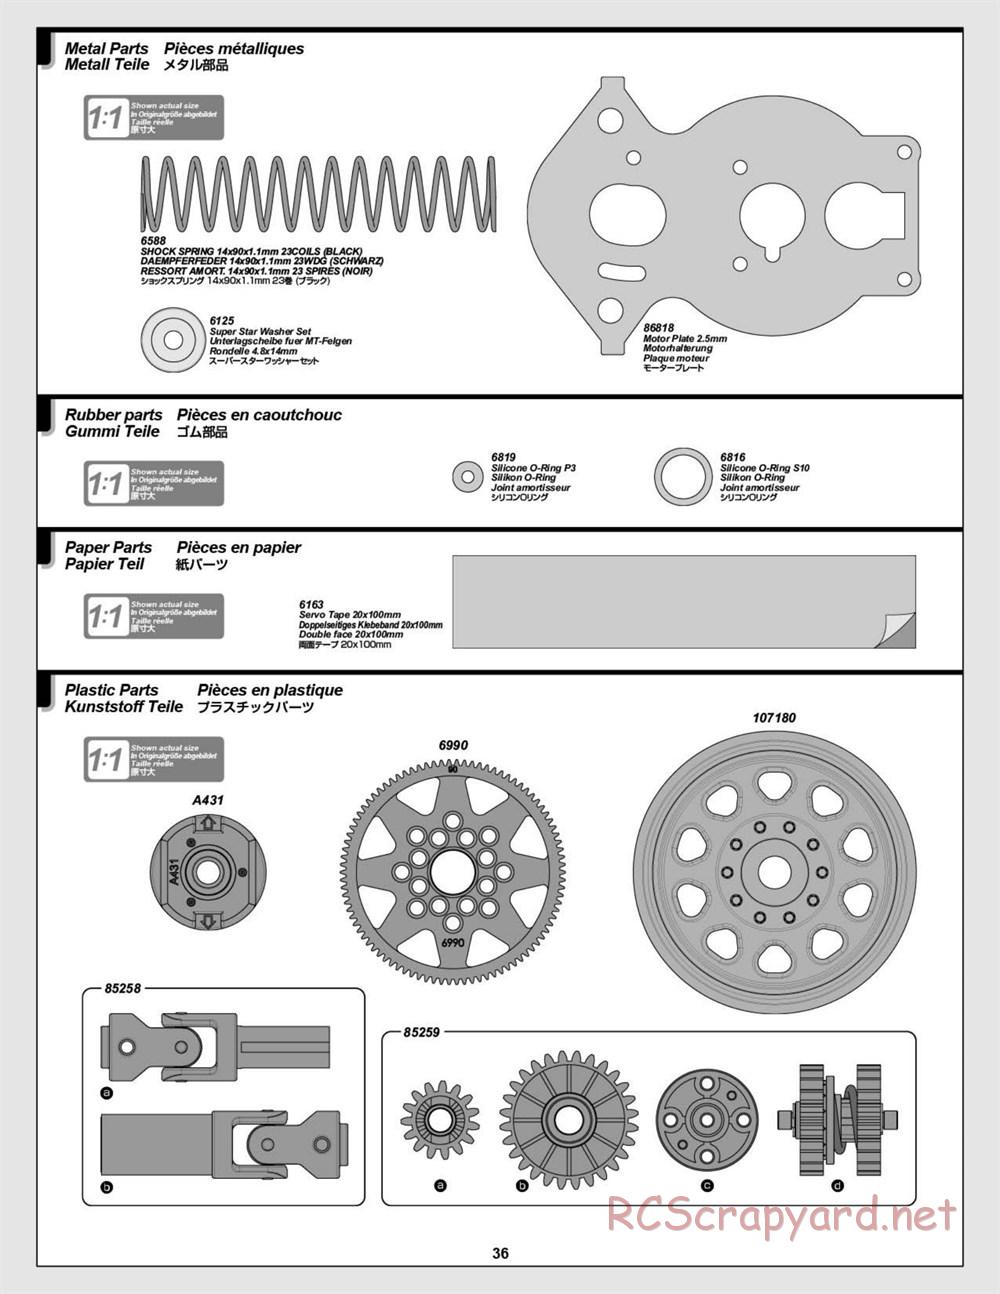 HPI - Wheely King 4x4 - Manual - Page 36